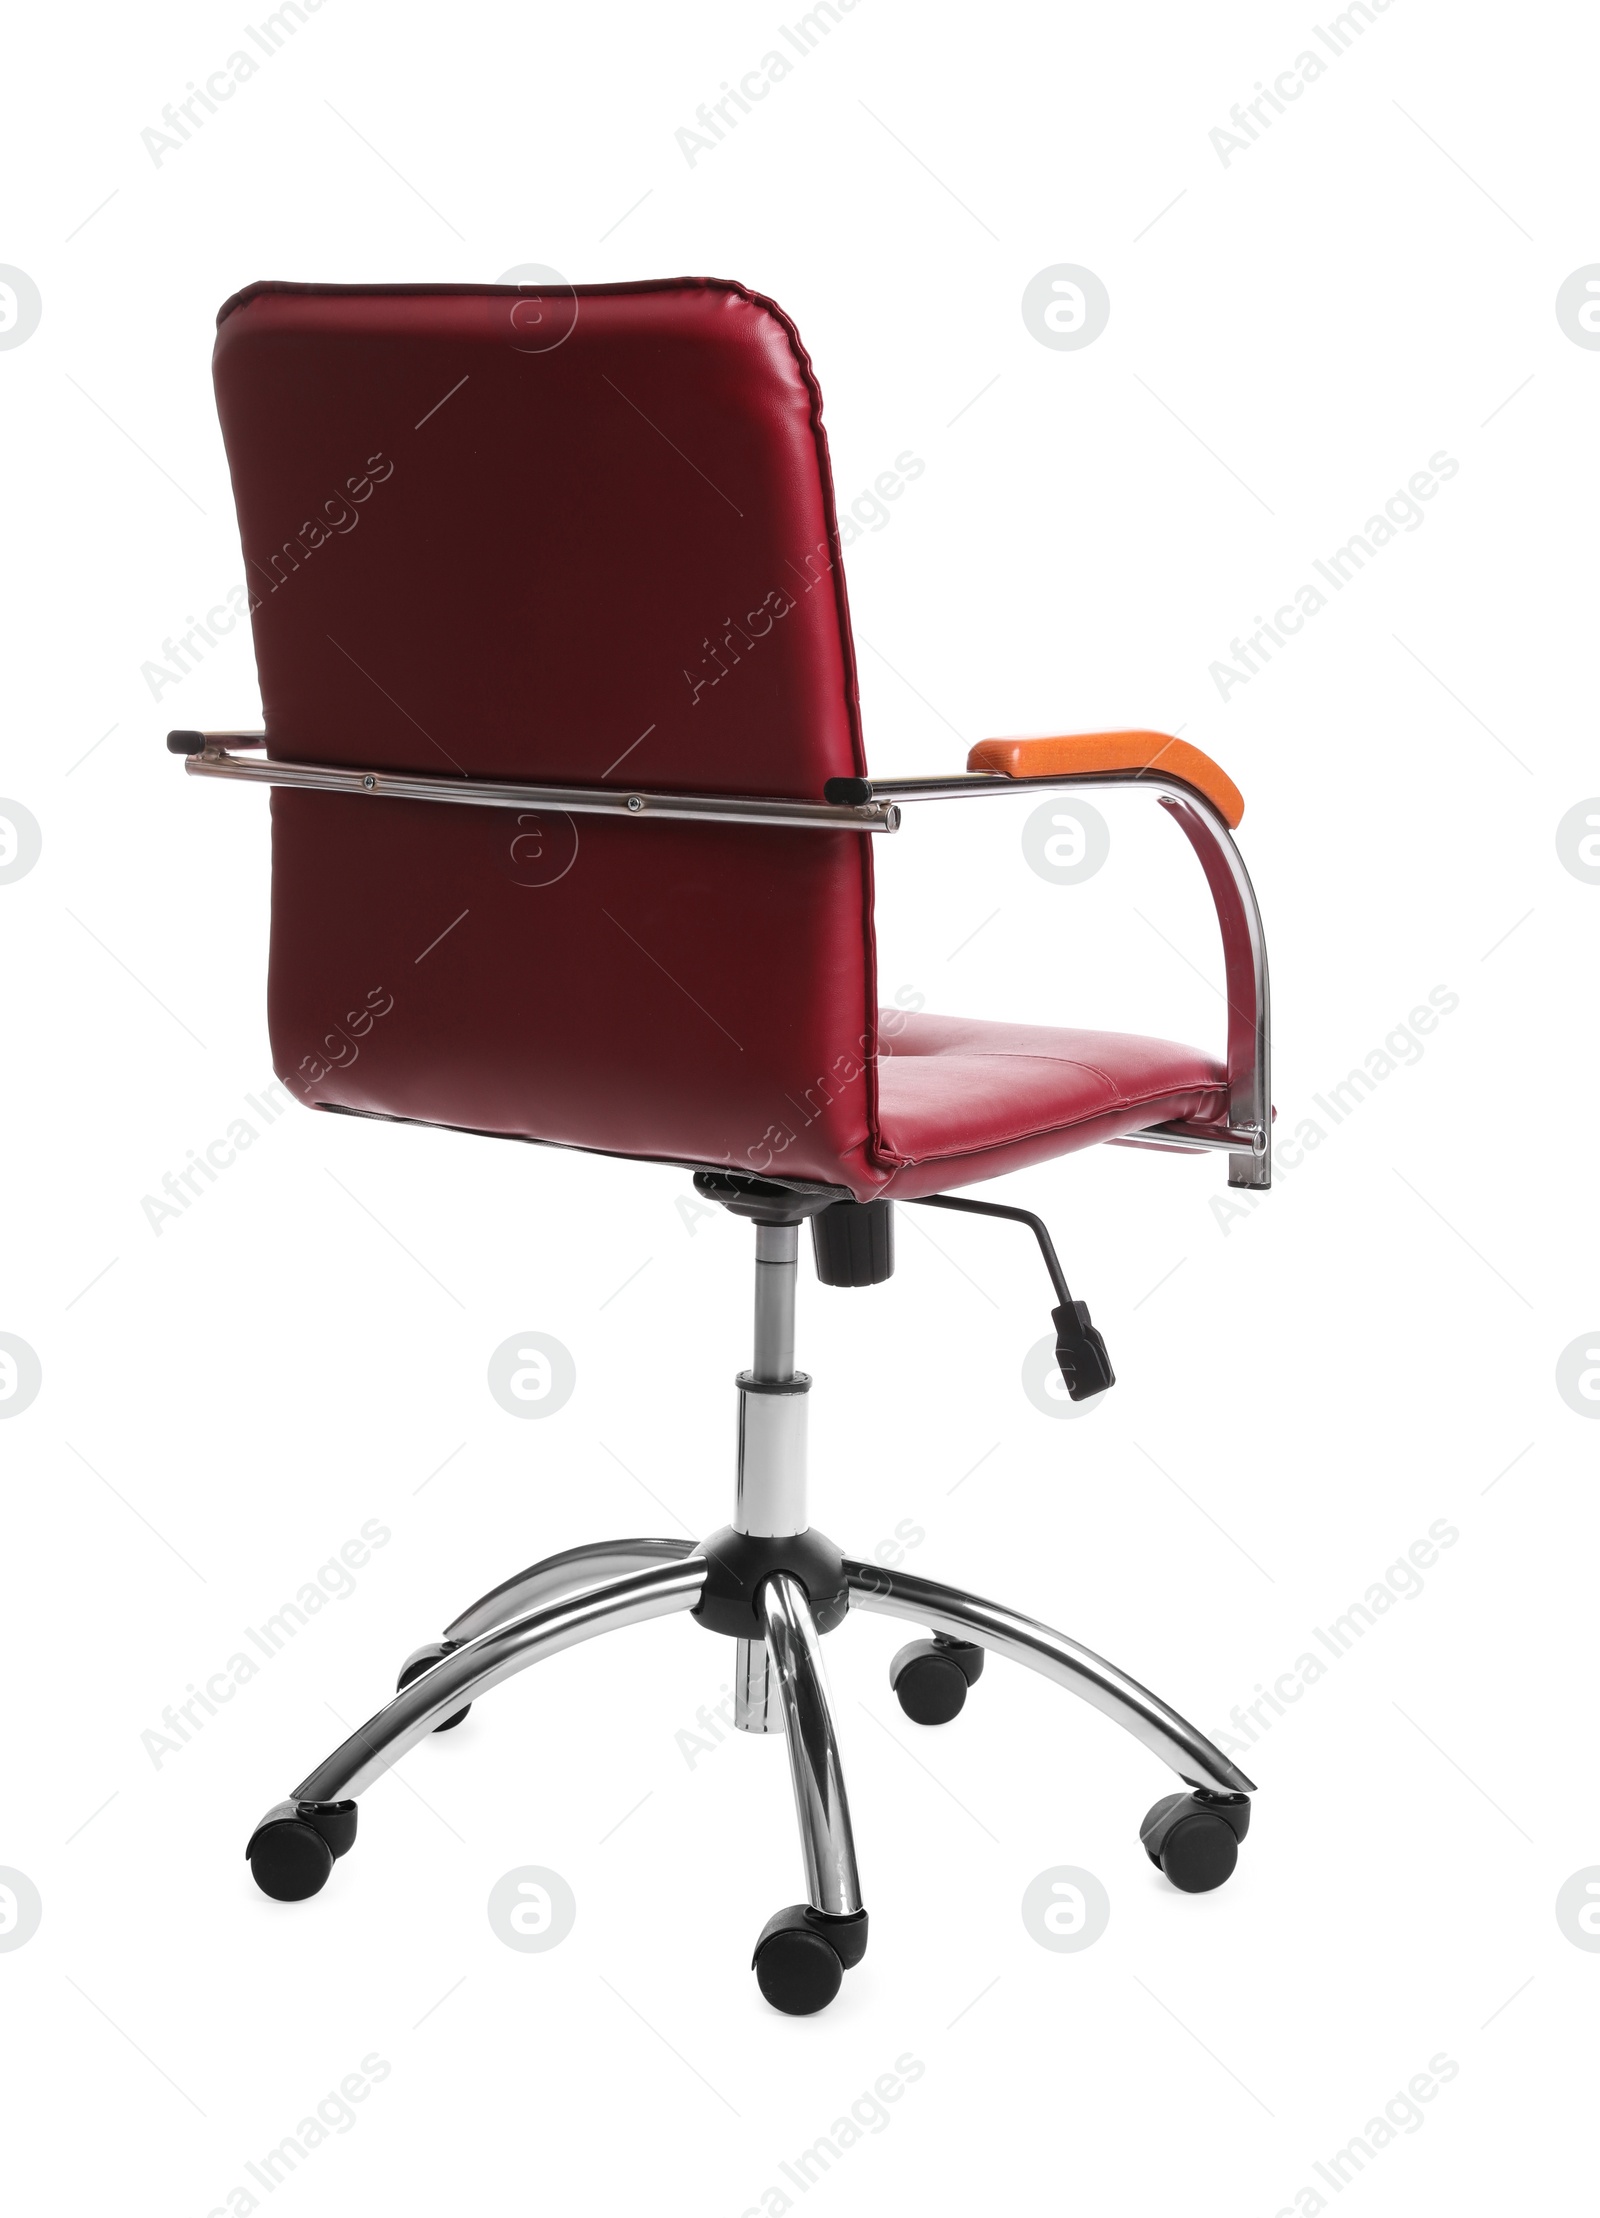 Photo of Comfortable leather office chair isolated on white